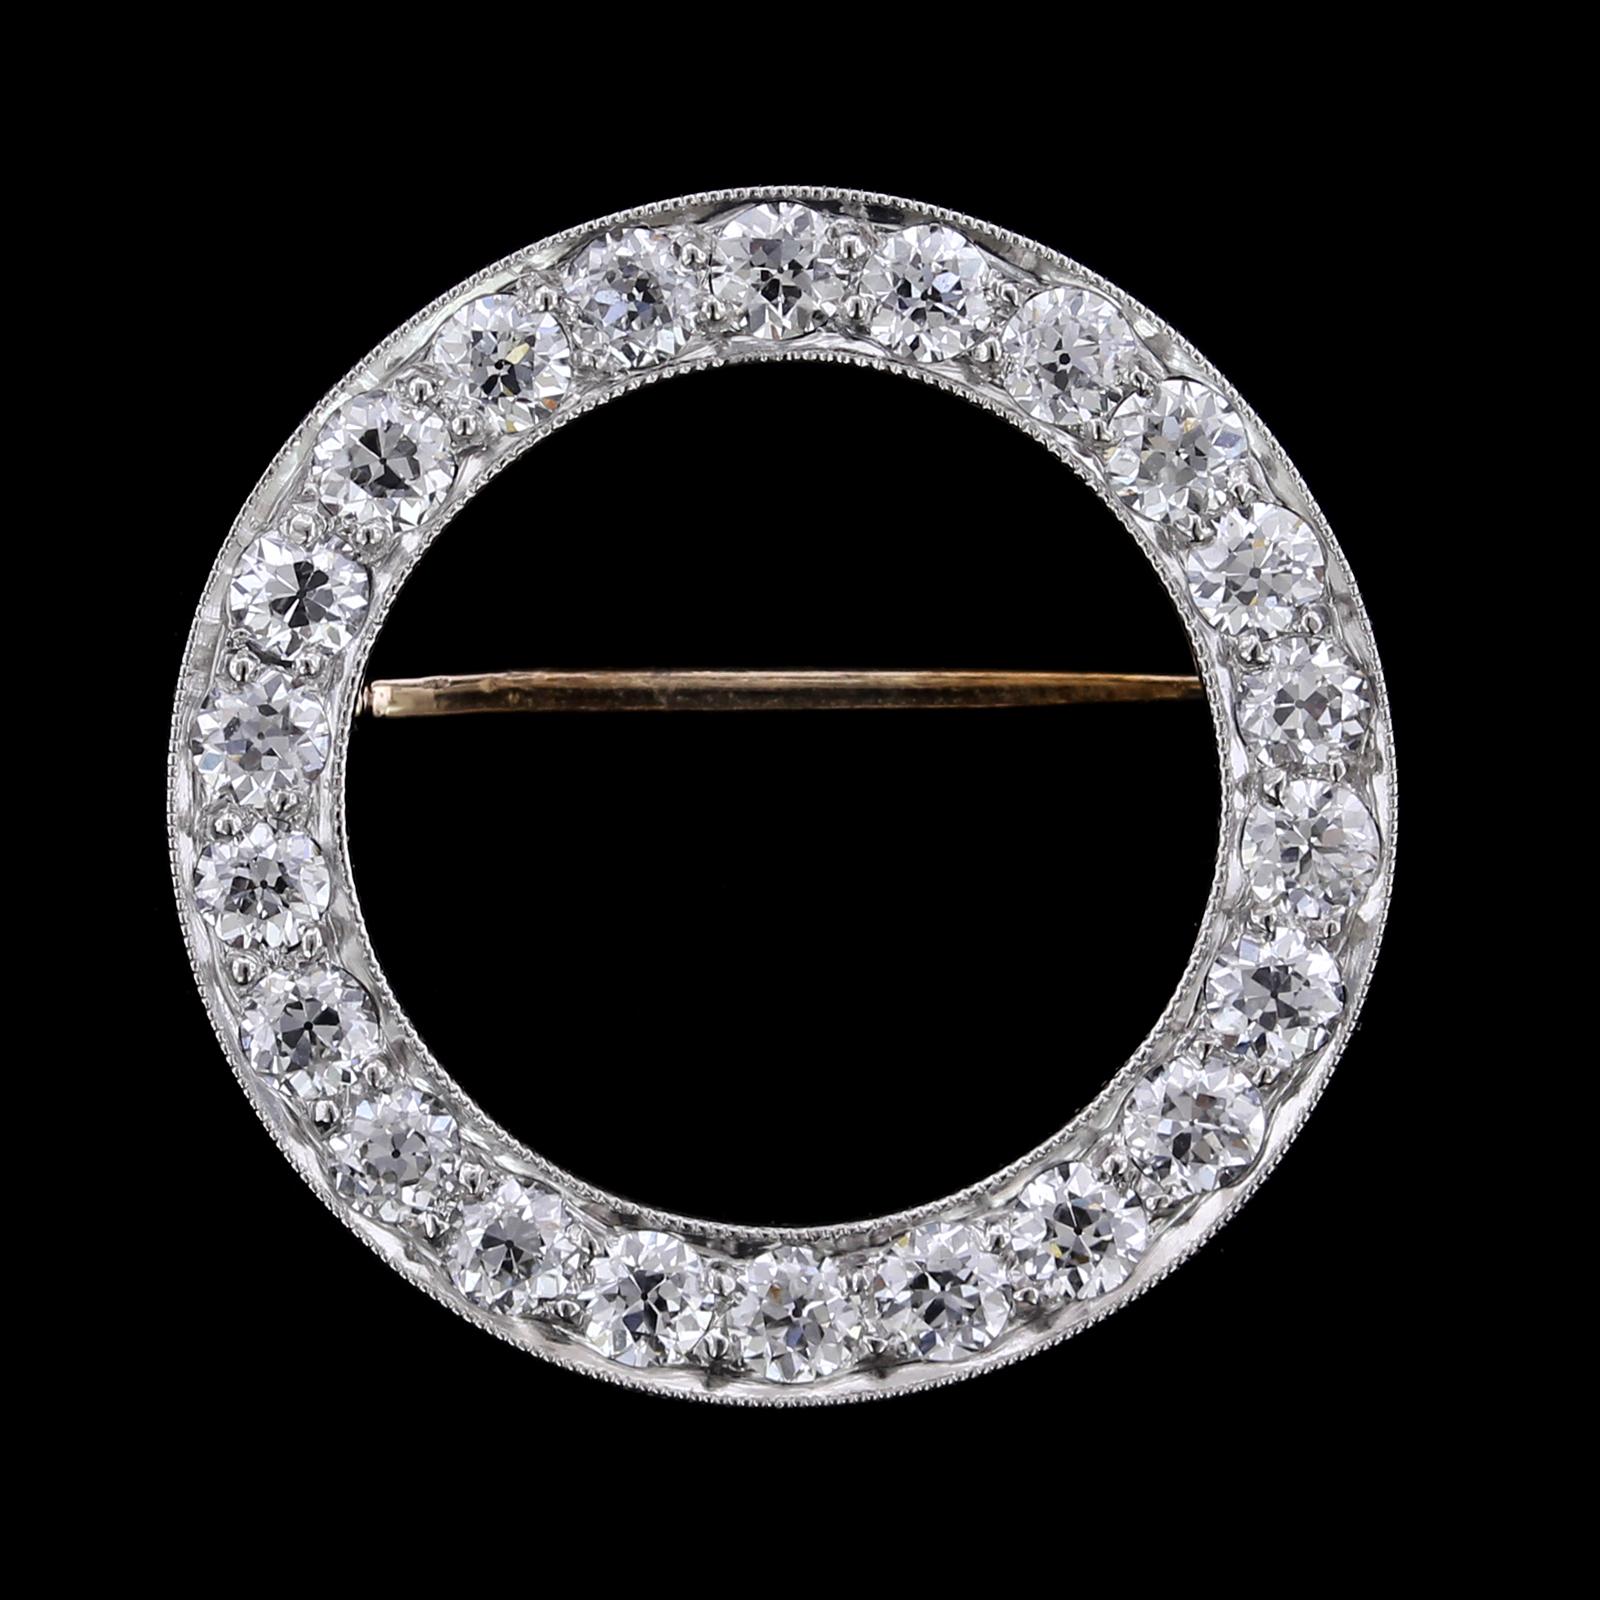 J.E. Caldwell Art Deco Platinum and Diamond Circle Pin. The pin is bead set with
22 old European cut diamonds, approx. total wt. 1.50cts., G-H color, VS clarity, #G8943,
diameter 1